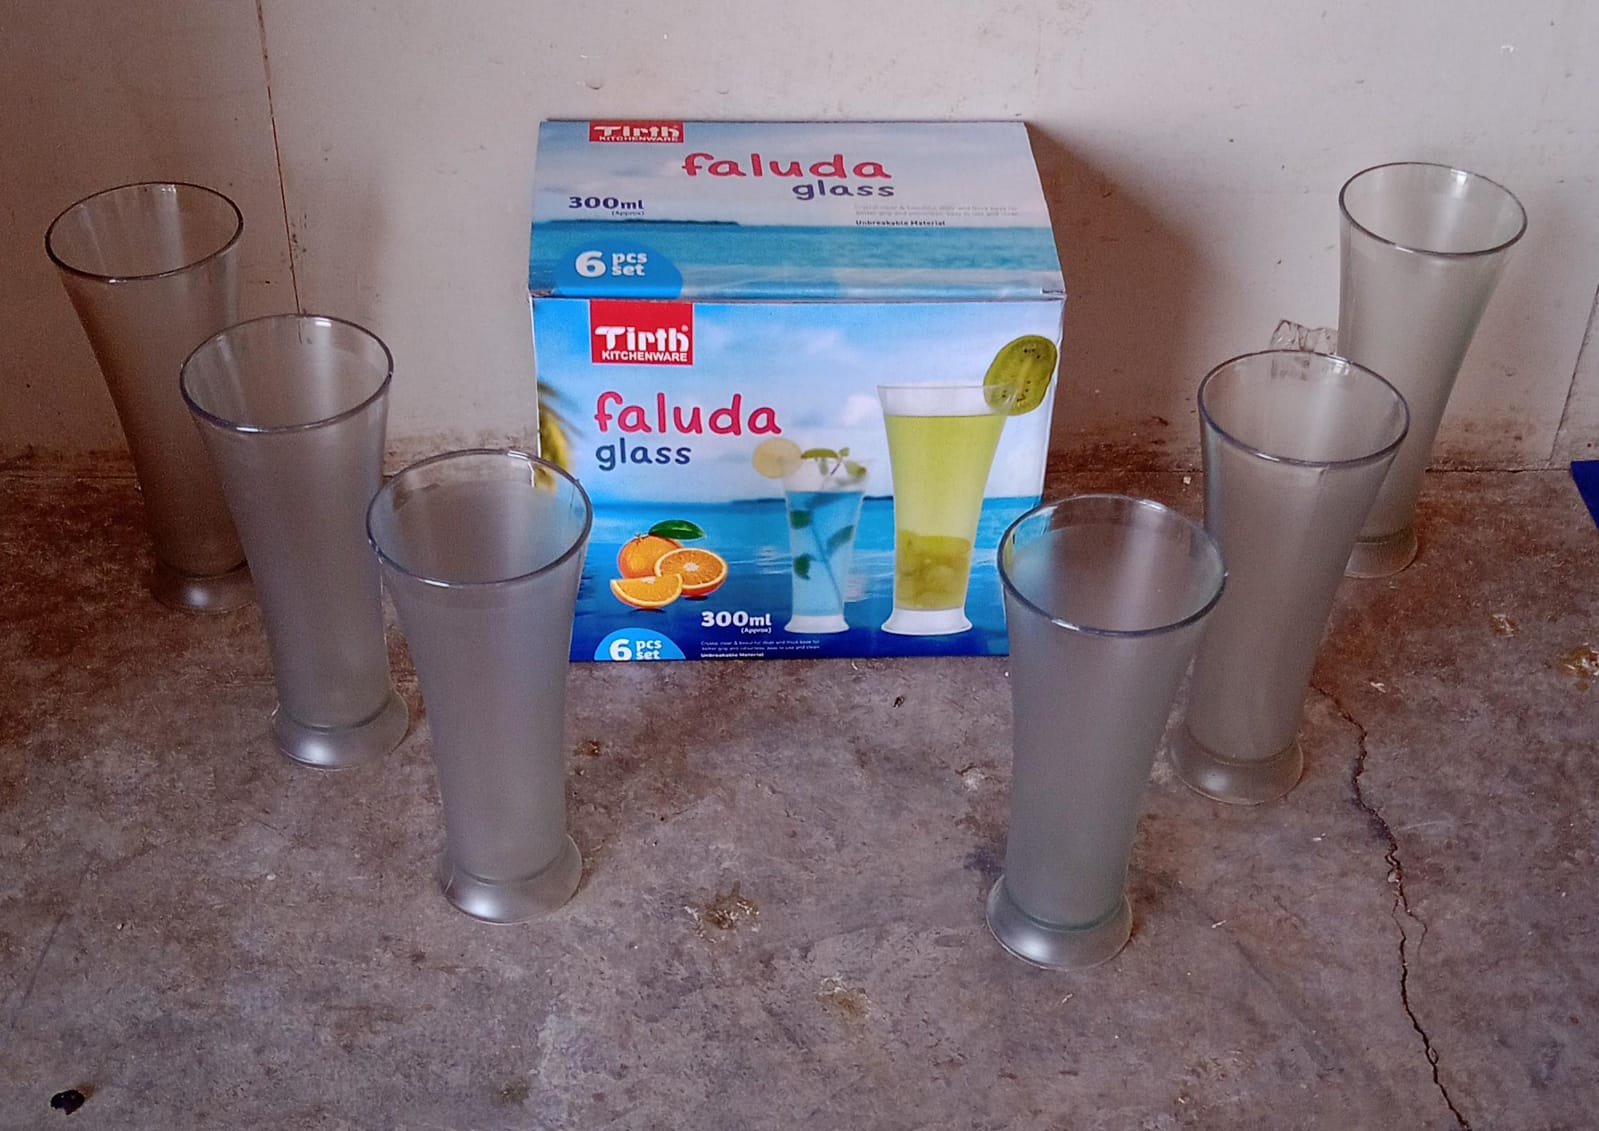 8219 High Quality Faluda, ice cream, Juicer and Water Glasses Set of 6 Transparent, Drinking Water Glasses Stylish Glasses for Faluda, Water, Juice, Glass Set of 6 Pcs (300 ML Approx)